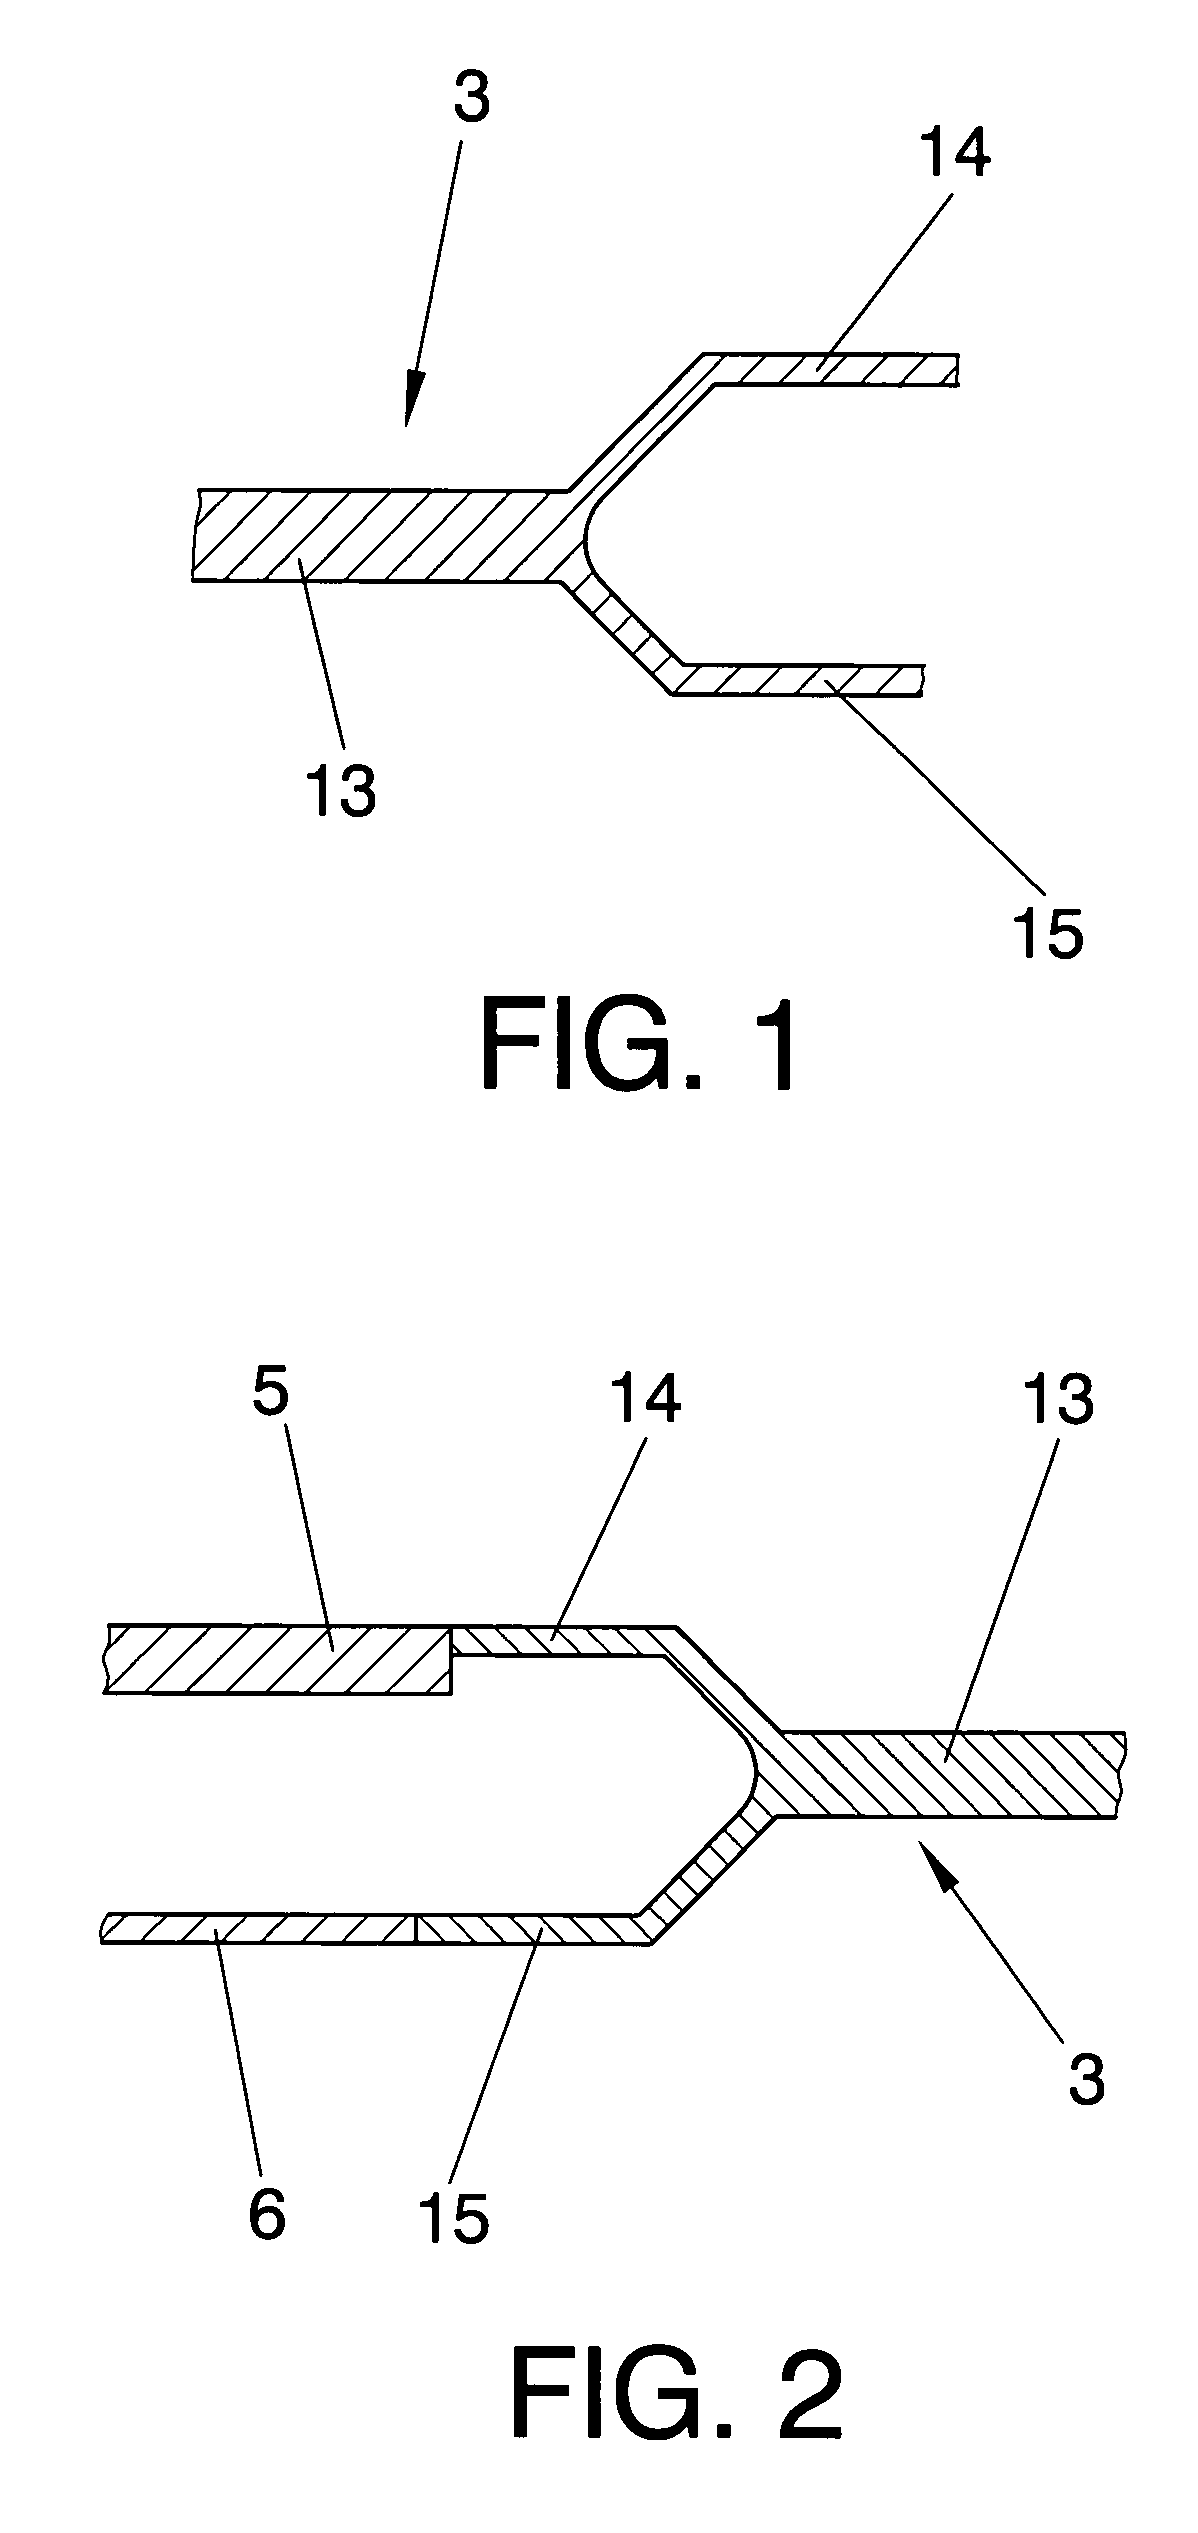 Fixing system for a leading edge to the structure of an aircraft lift plane